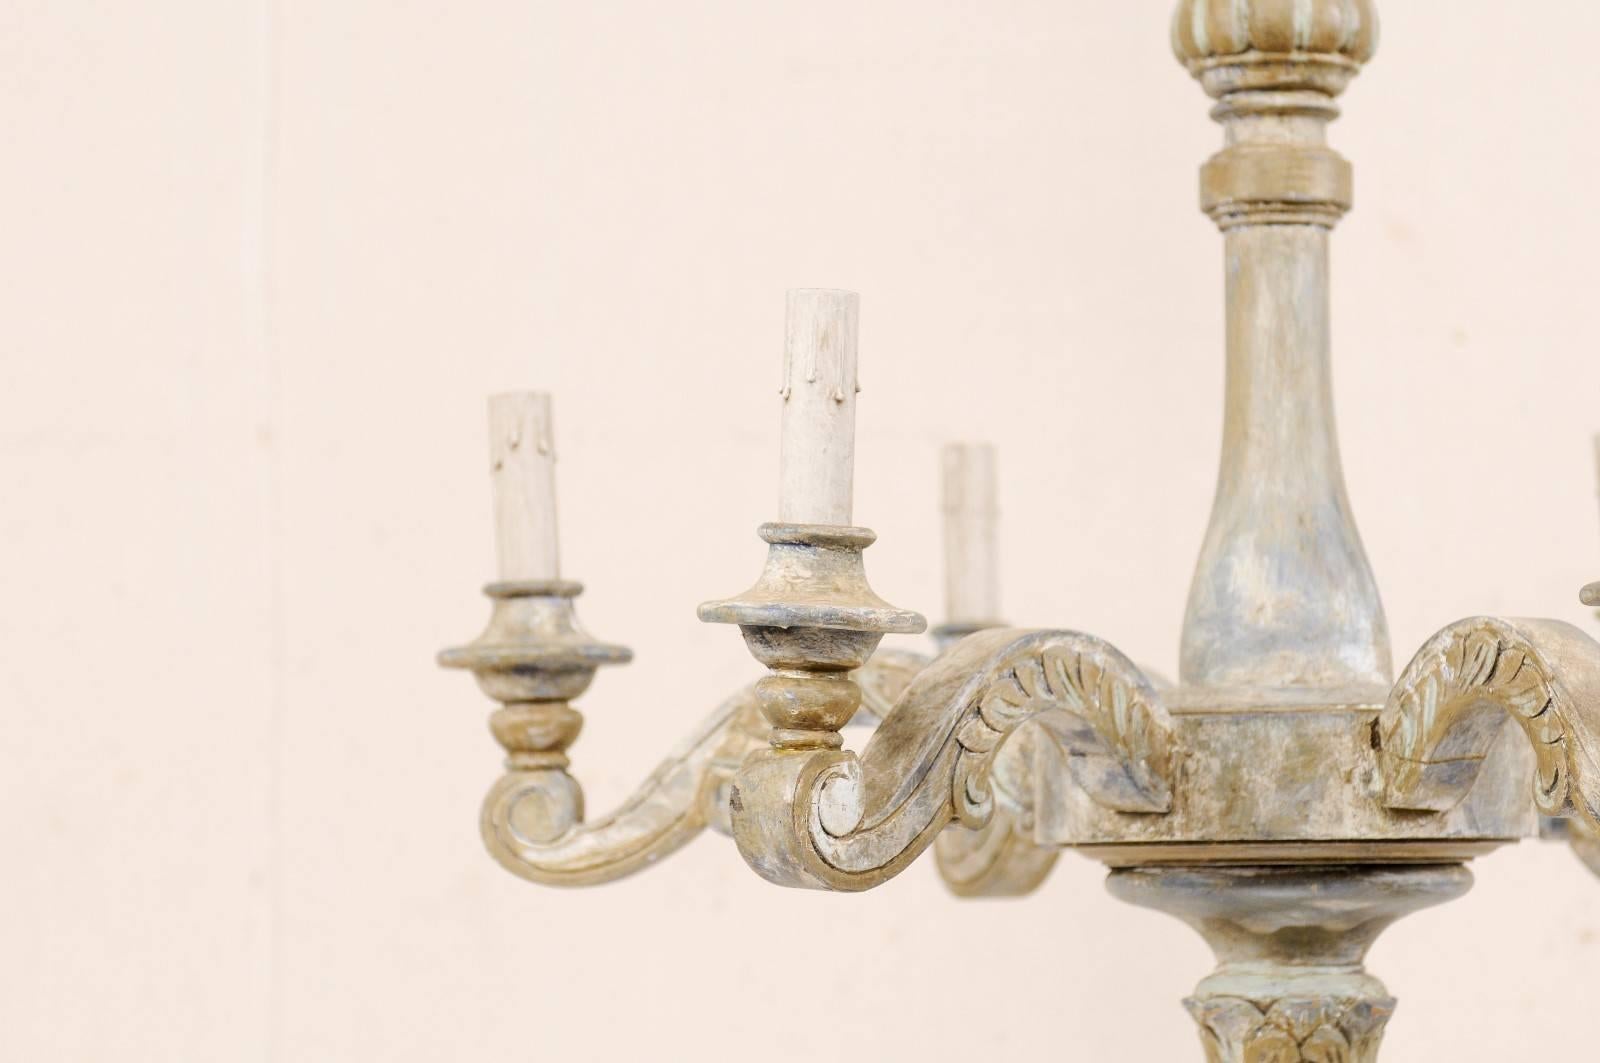 20th Century French Vintage Painted and Carved Wood Six-Light Chandelier with Scrolled Arms